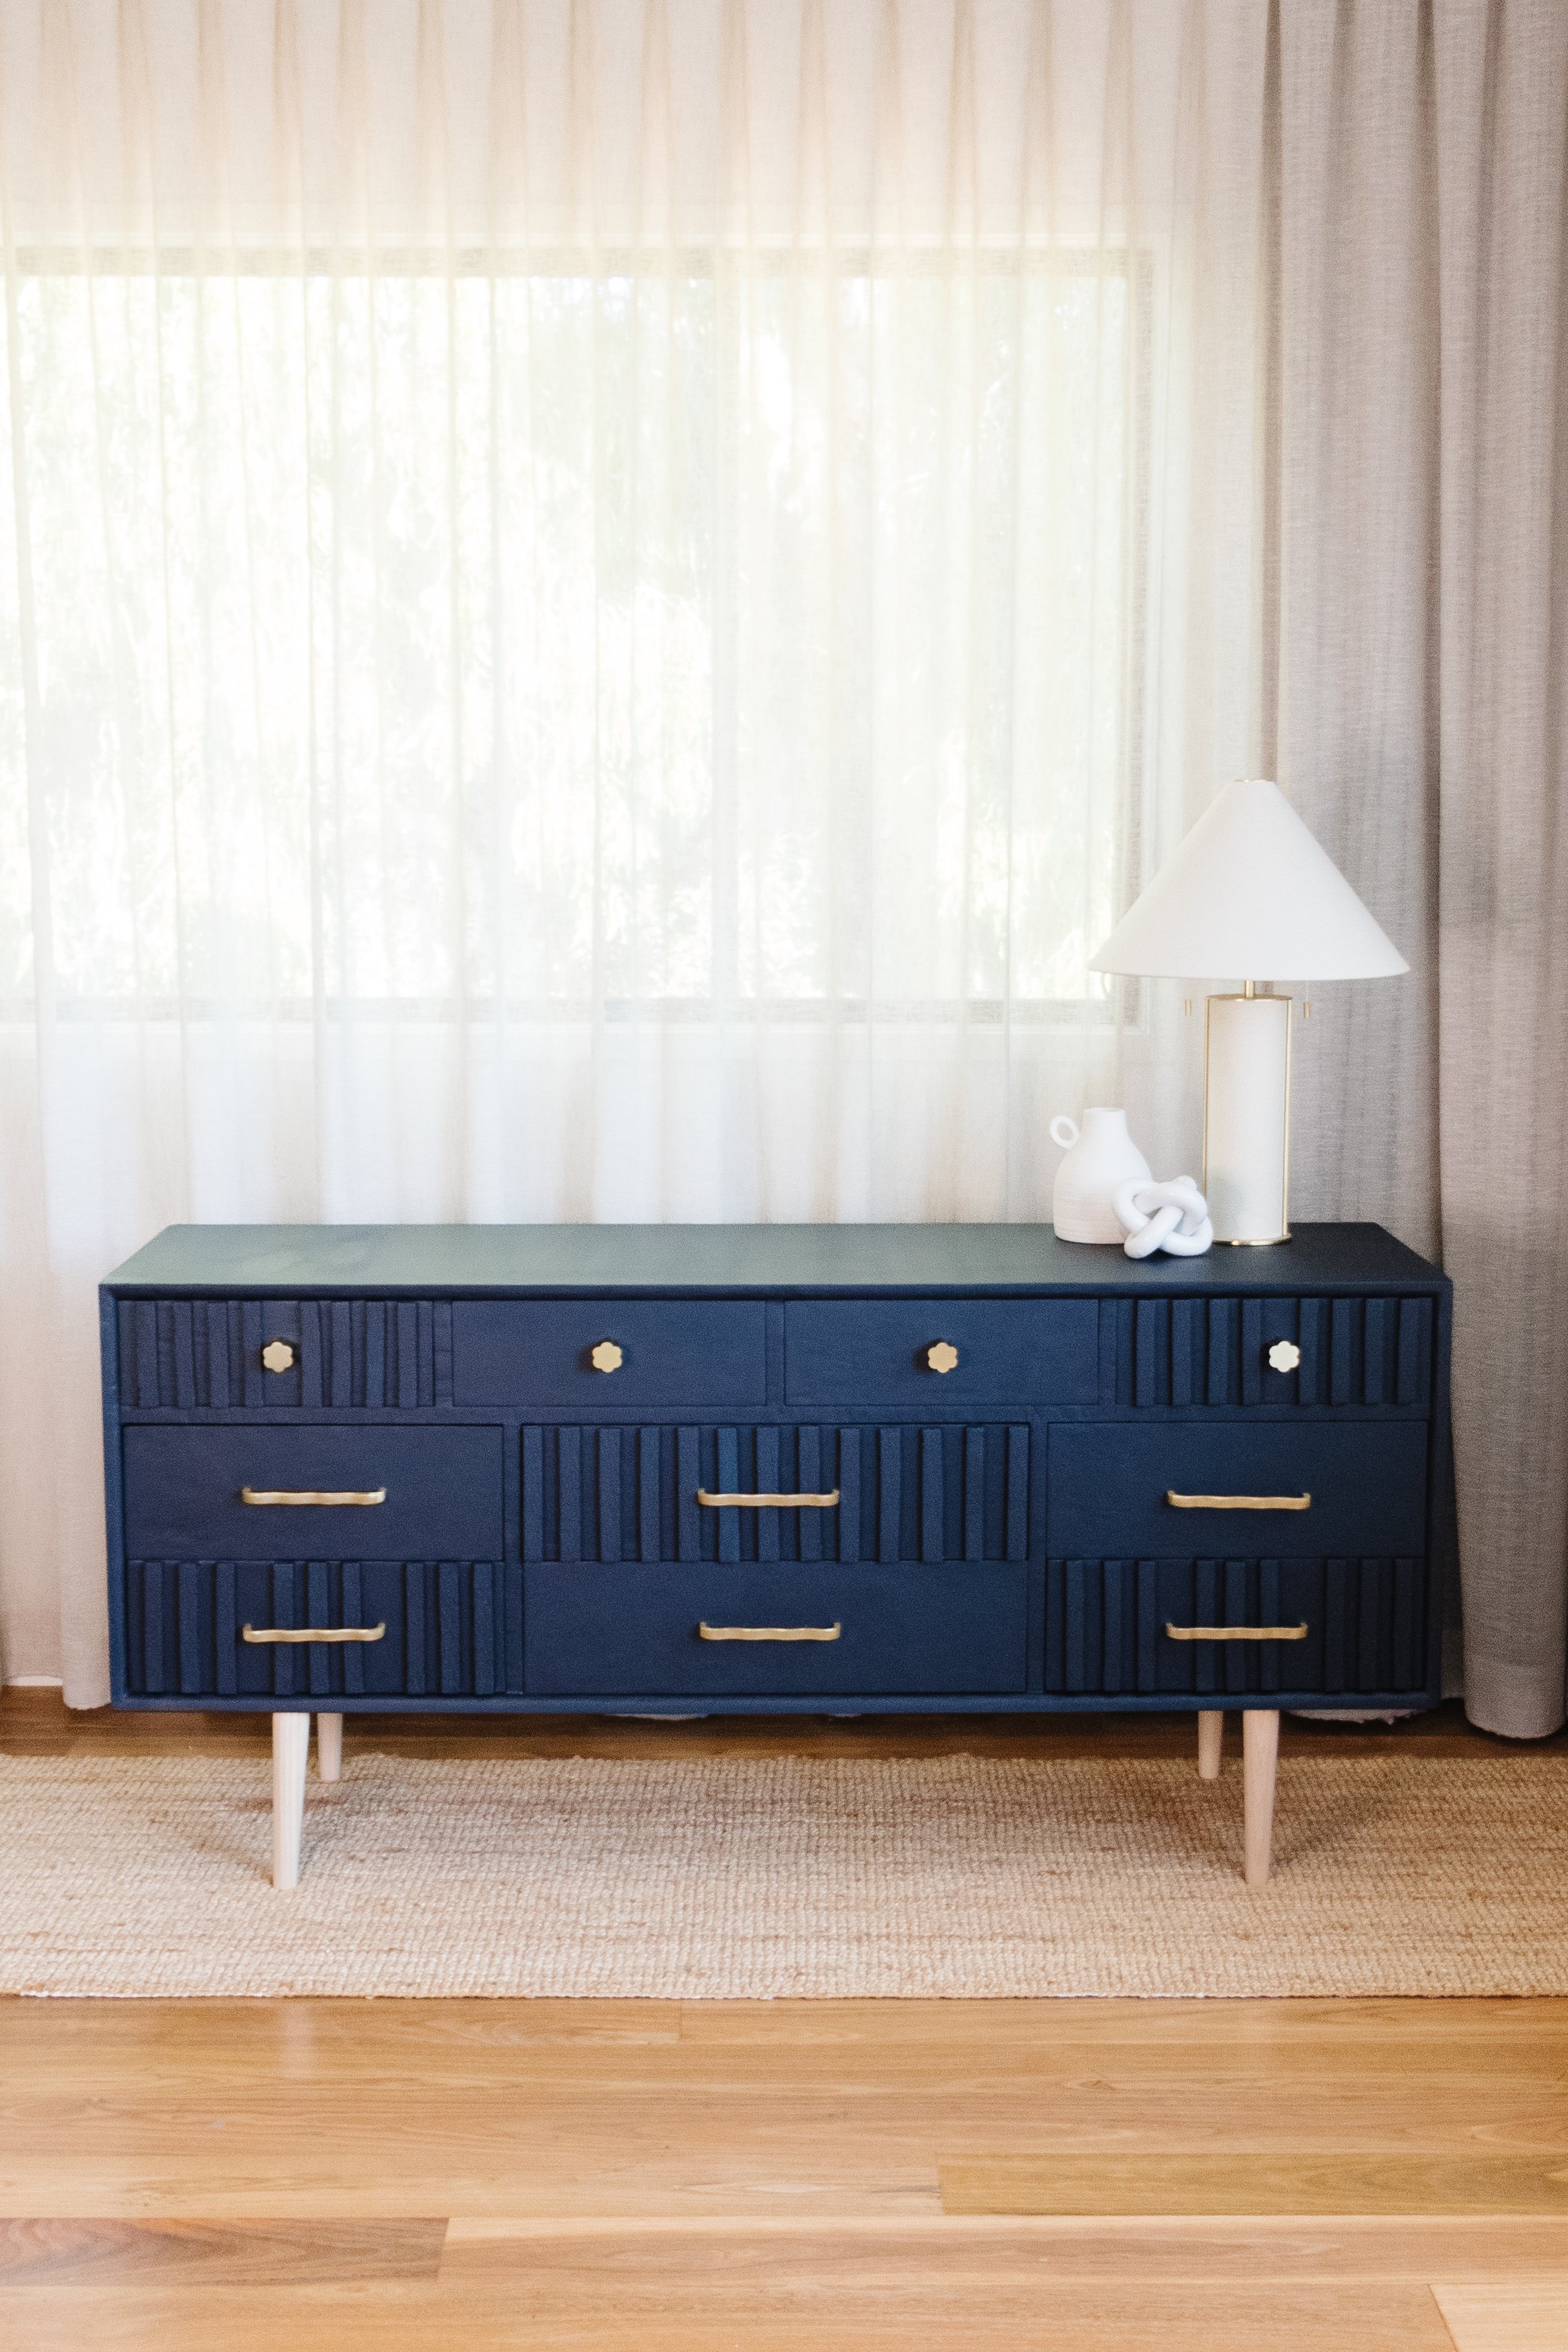 Upcycled Fluted Sideboard Smor Home_1.jpg